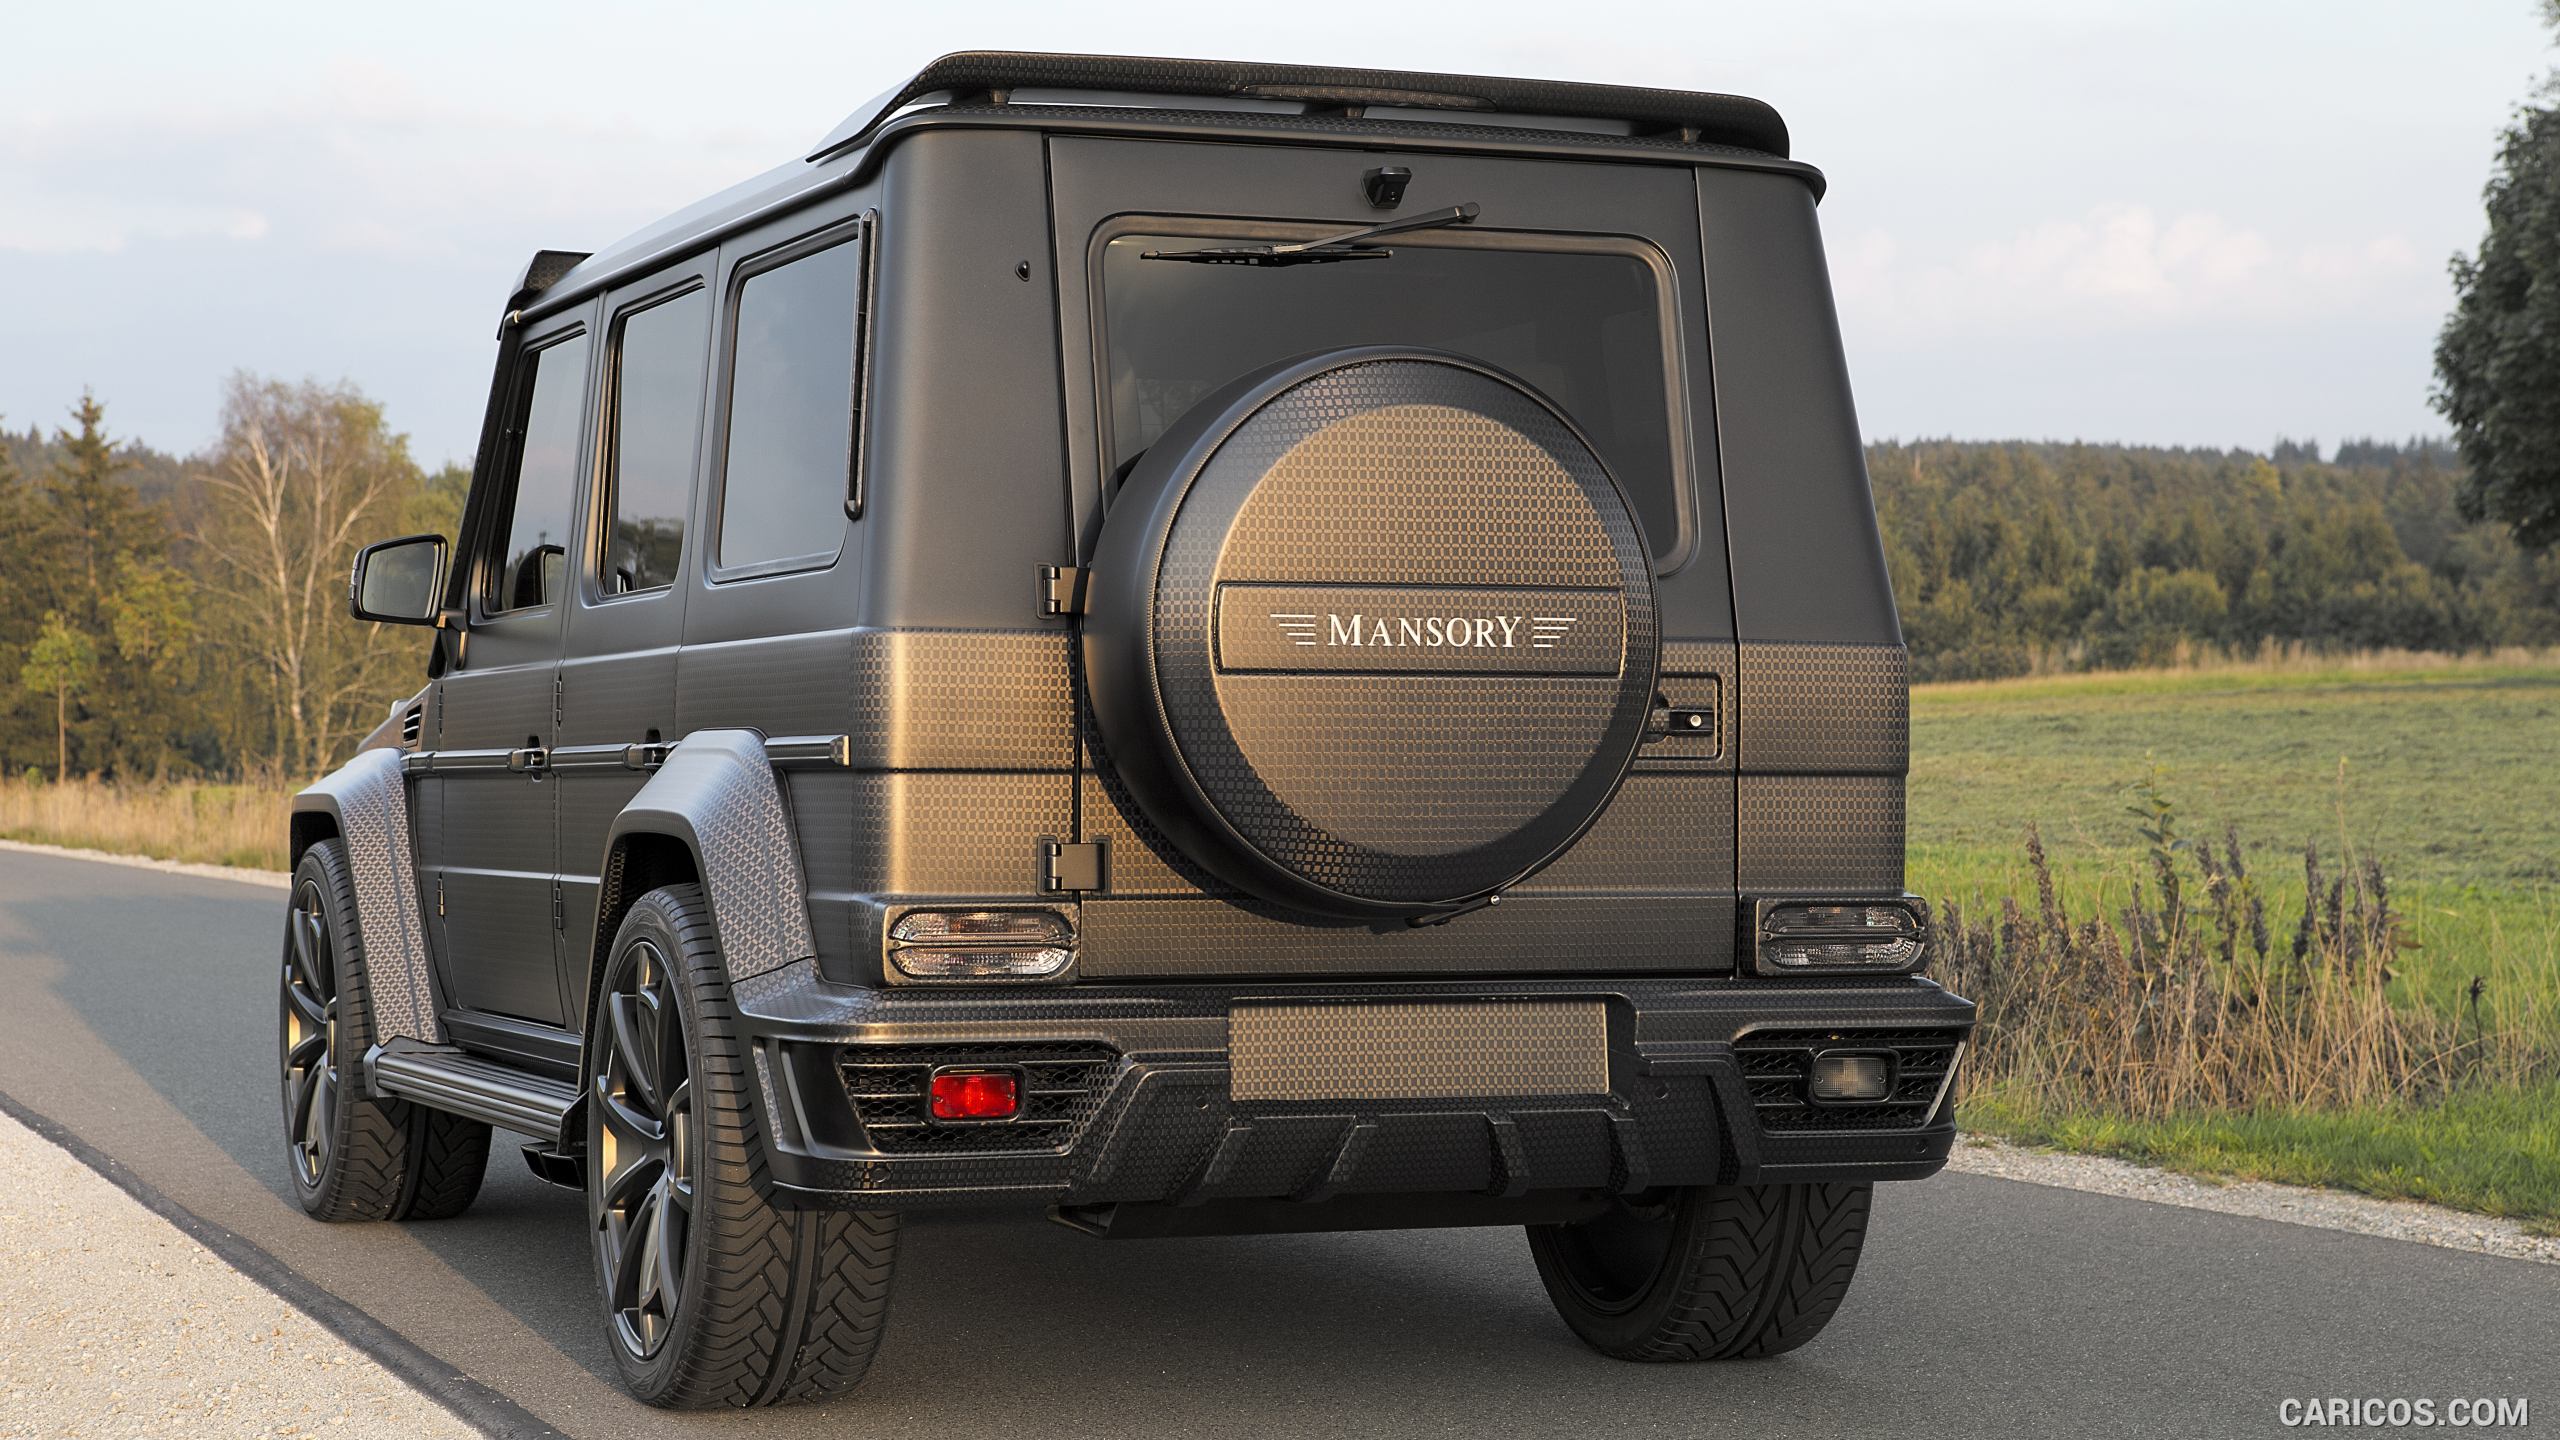 2016 MANSORY GRONOS Black Edition based on Mercedes G63 AMG - Rear, #5 of 16